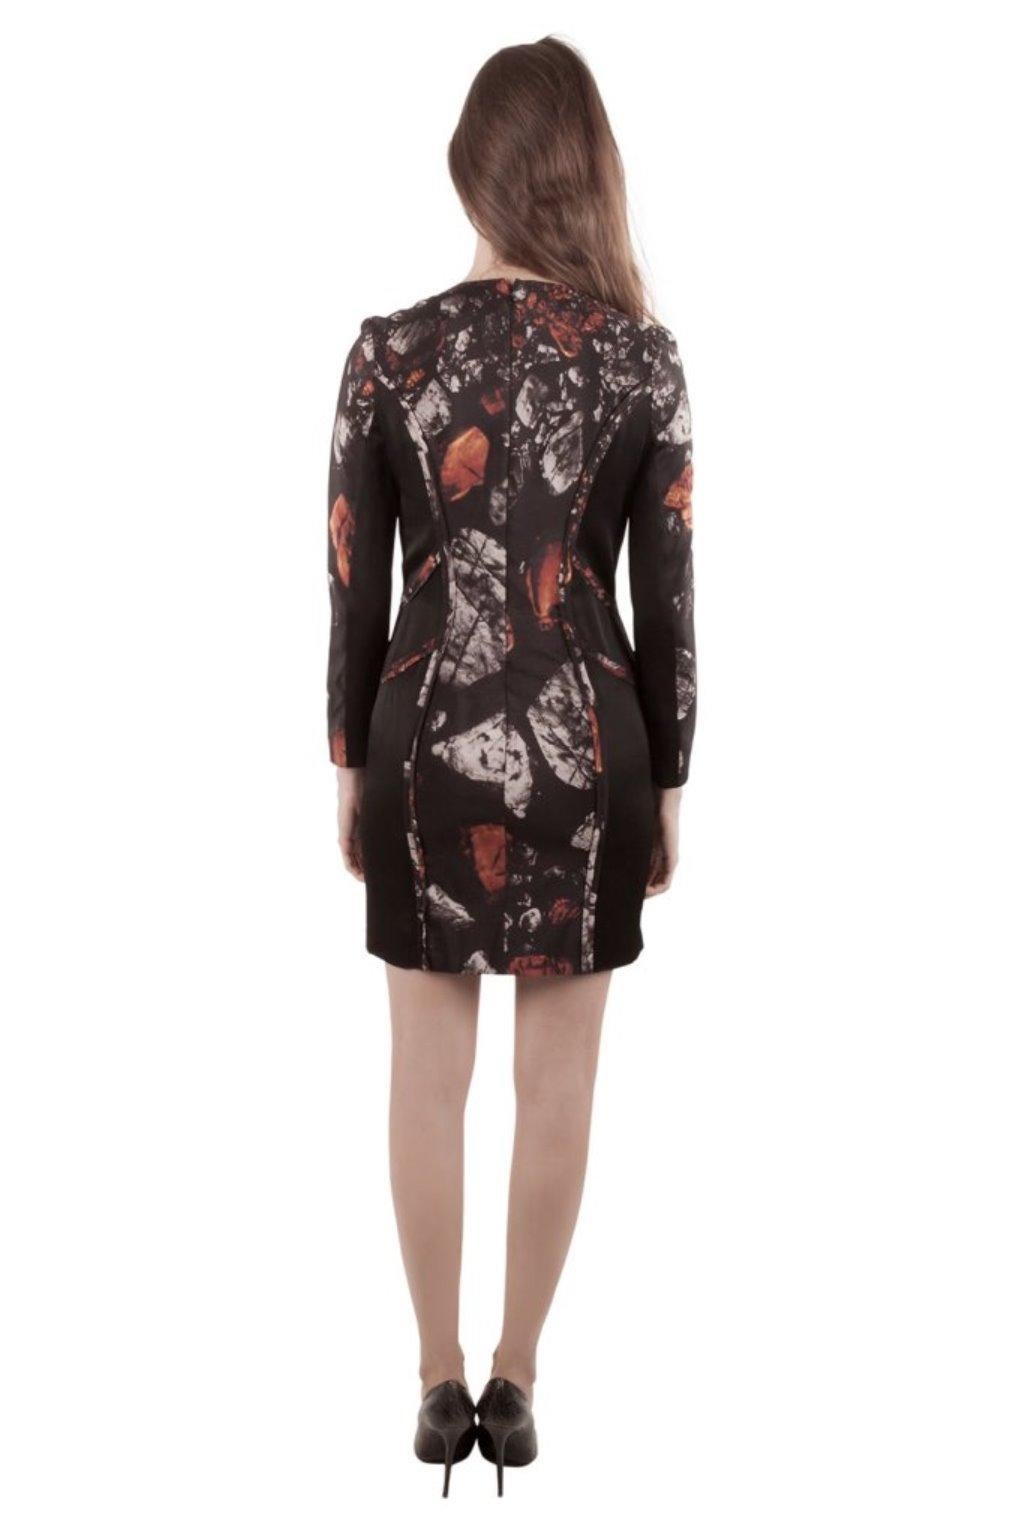 Made by Monique Lhuillier, this sheath dress will suit your style in the most enticing way. Tailored from a silk blend, it is designed with long sleeves, zip closure and beautiful abstract print. The black dress will go well for a formal day out or